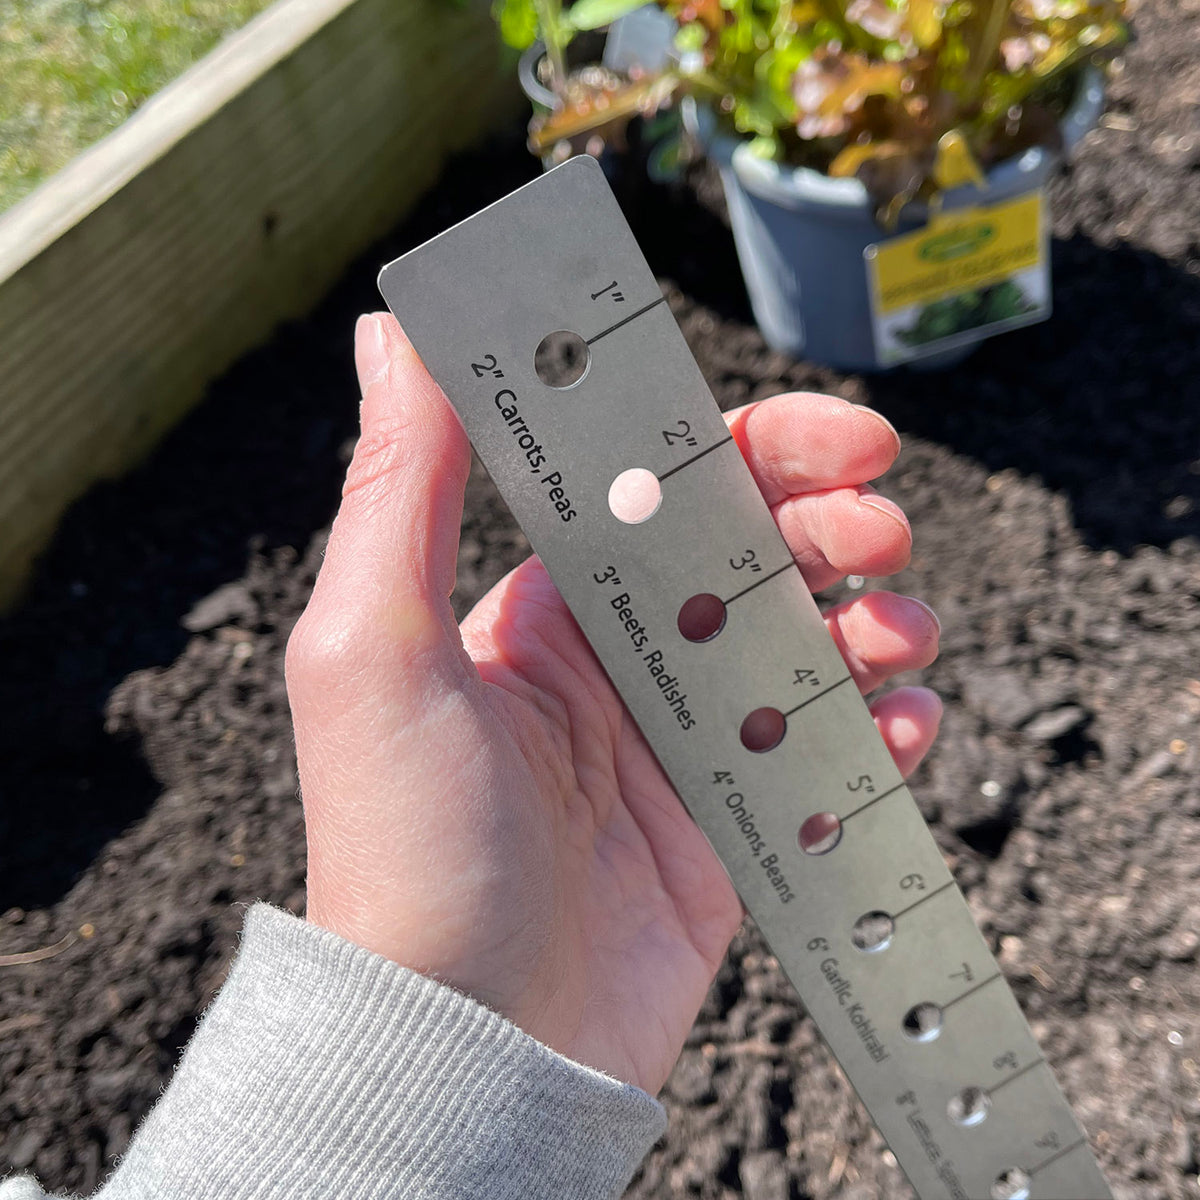  12-Hole Seed-in Soil Digger Soil Spacer Small Garden Seeds  Spacer Hand Held Garden Hole Punch Dibbler Tool for Planting Seeds : Patio,  Lawn & Garden